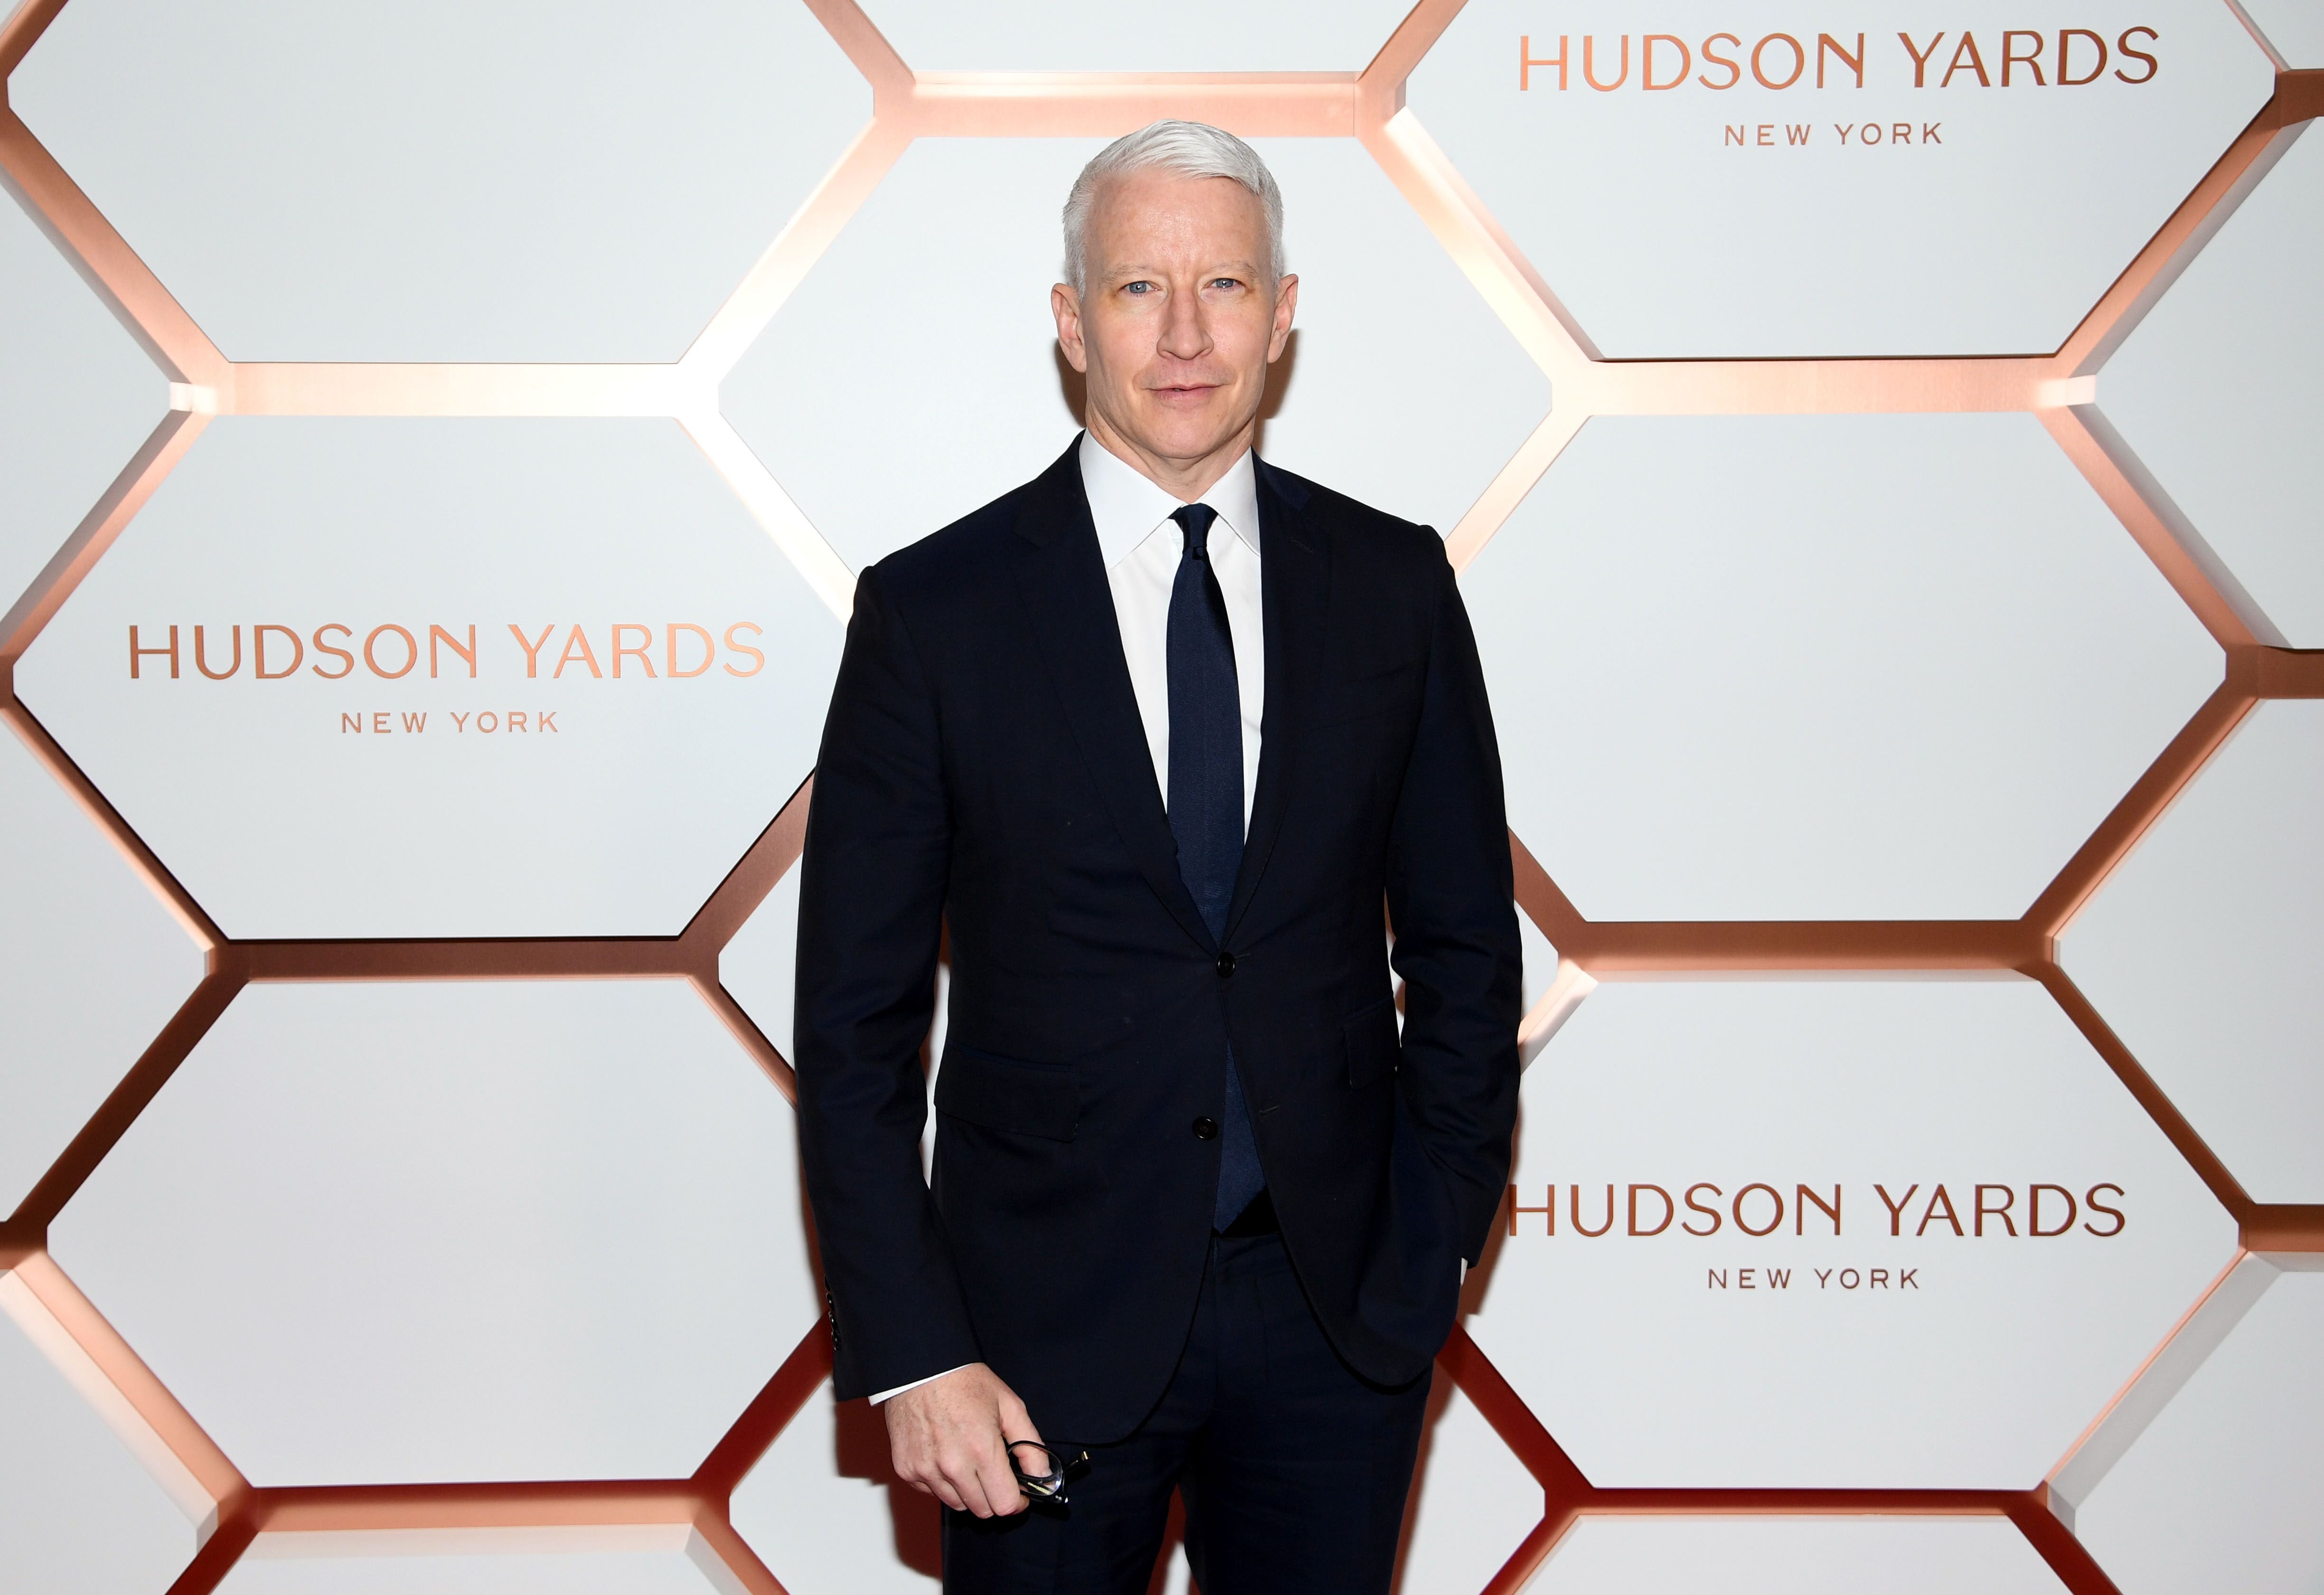 Anderson Cooper at Hudson Yards, New York's Newest Neighborhood, Official Opening Event on March 15, 2019 | Photo: Getty Images